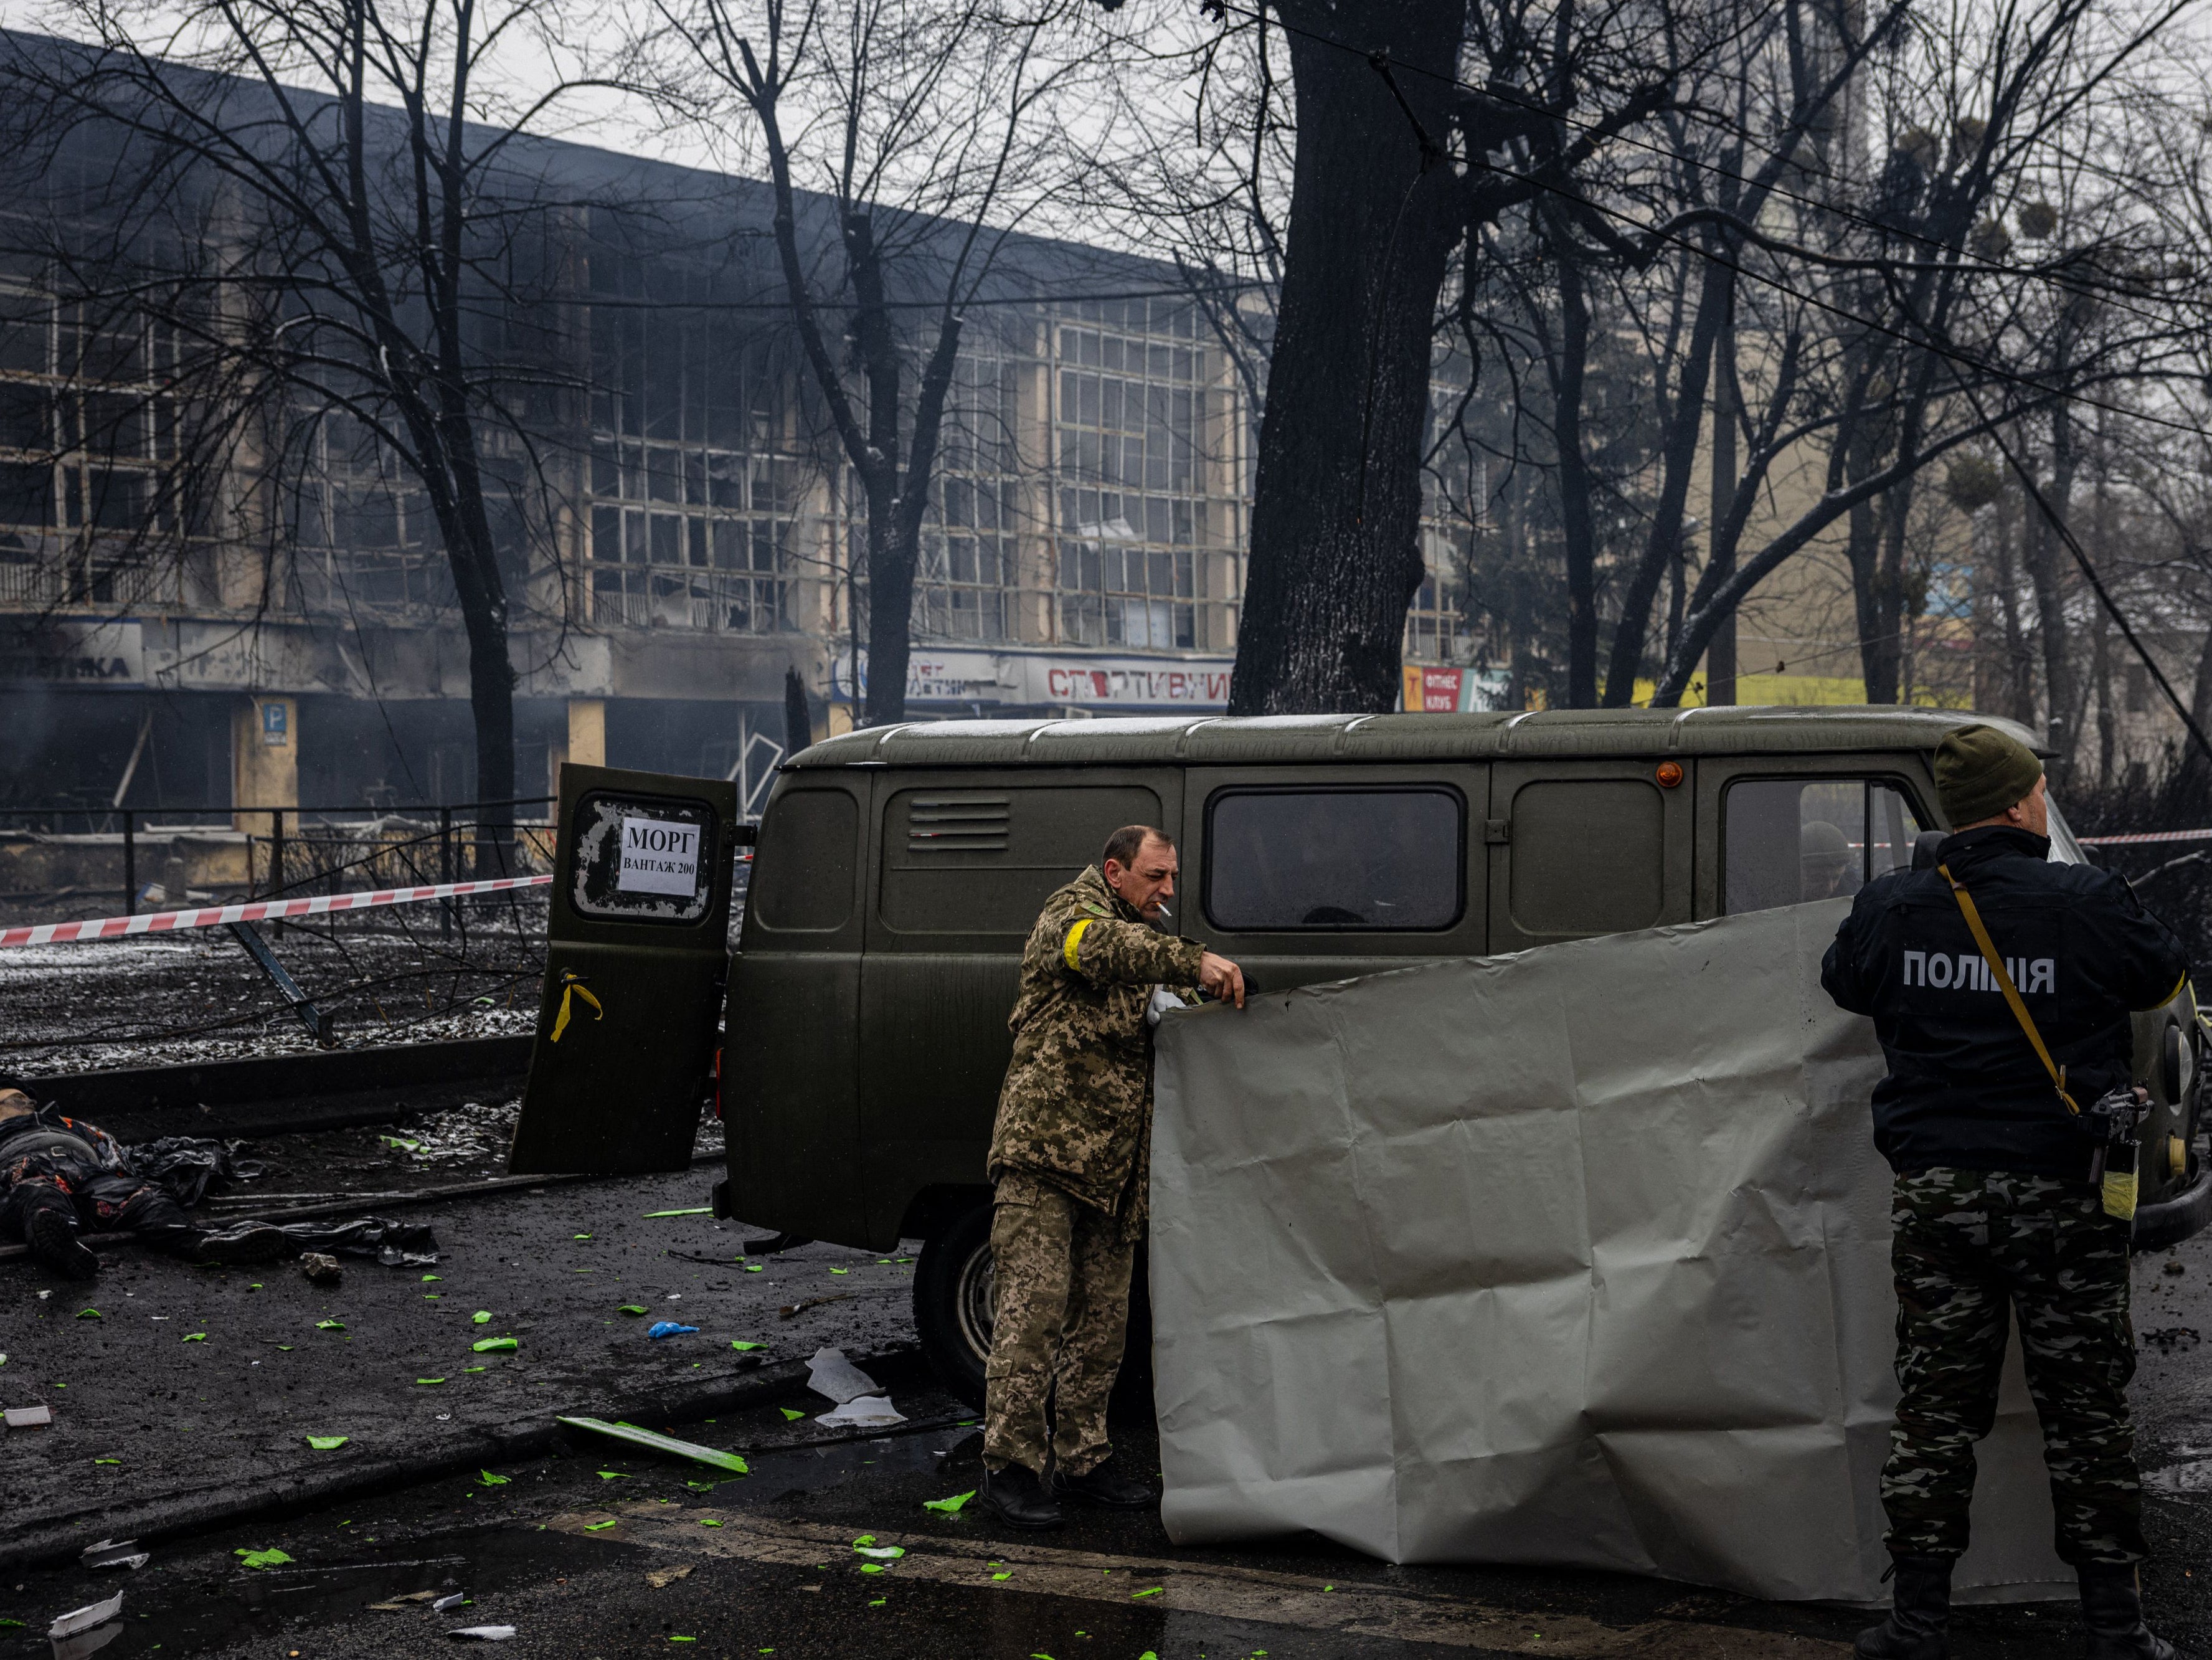 Kyiv has been turned into a war zone under the Russians’ constant bombings